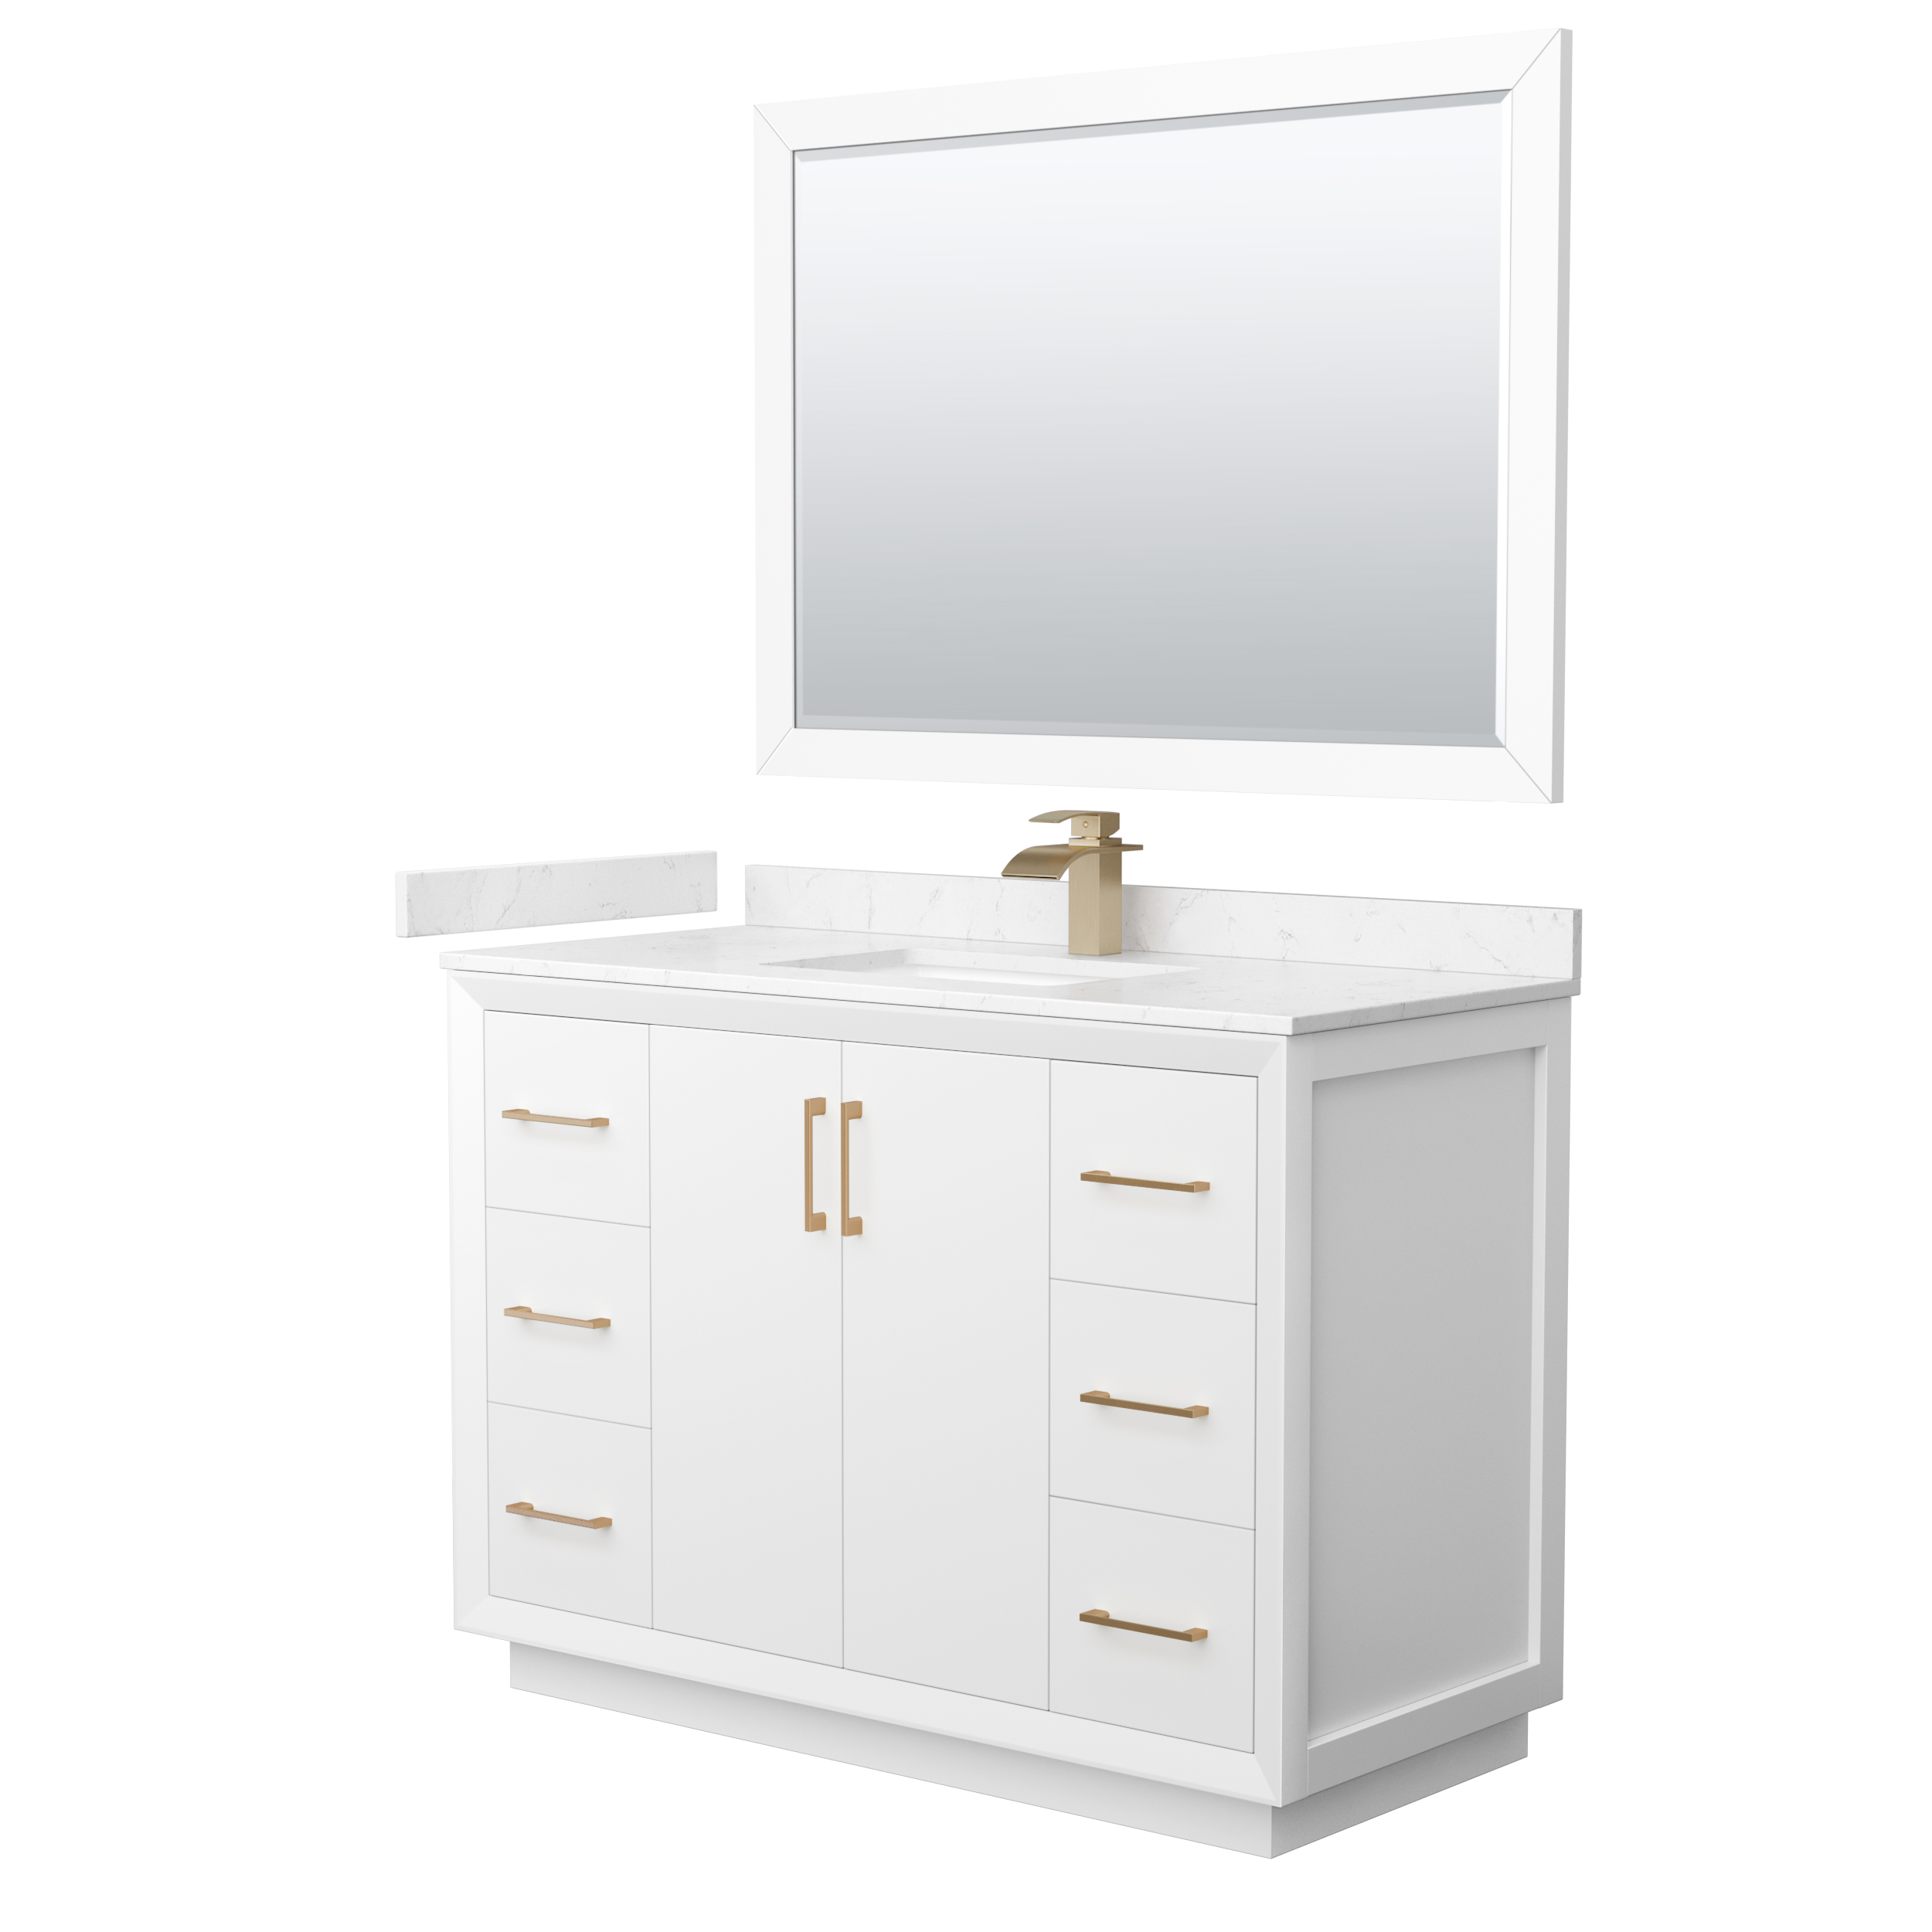 Strada 48" Single Vanity with optional Cultured Marble Counter - White WC-4141-48-SGL-VAN-WHT-